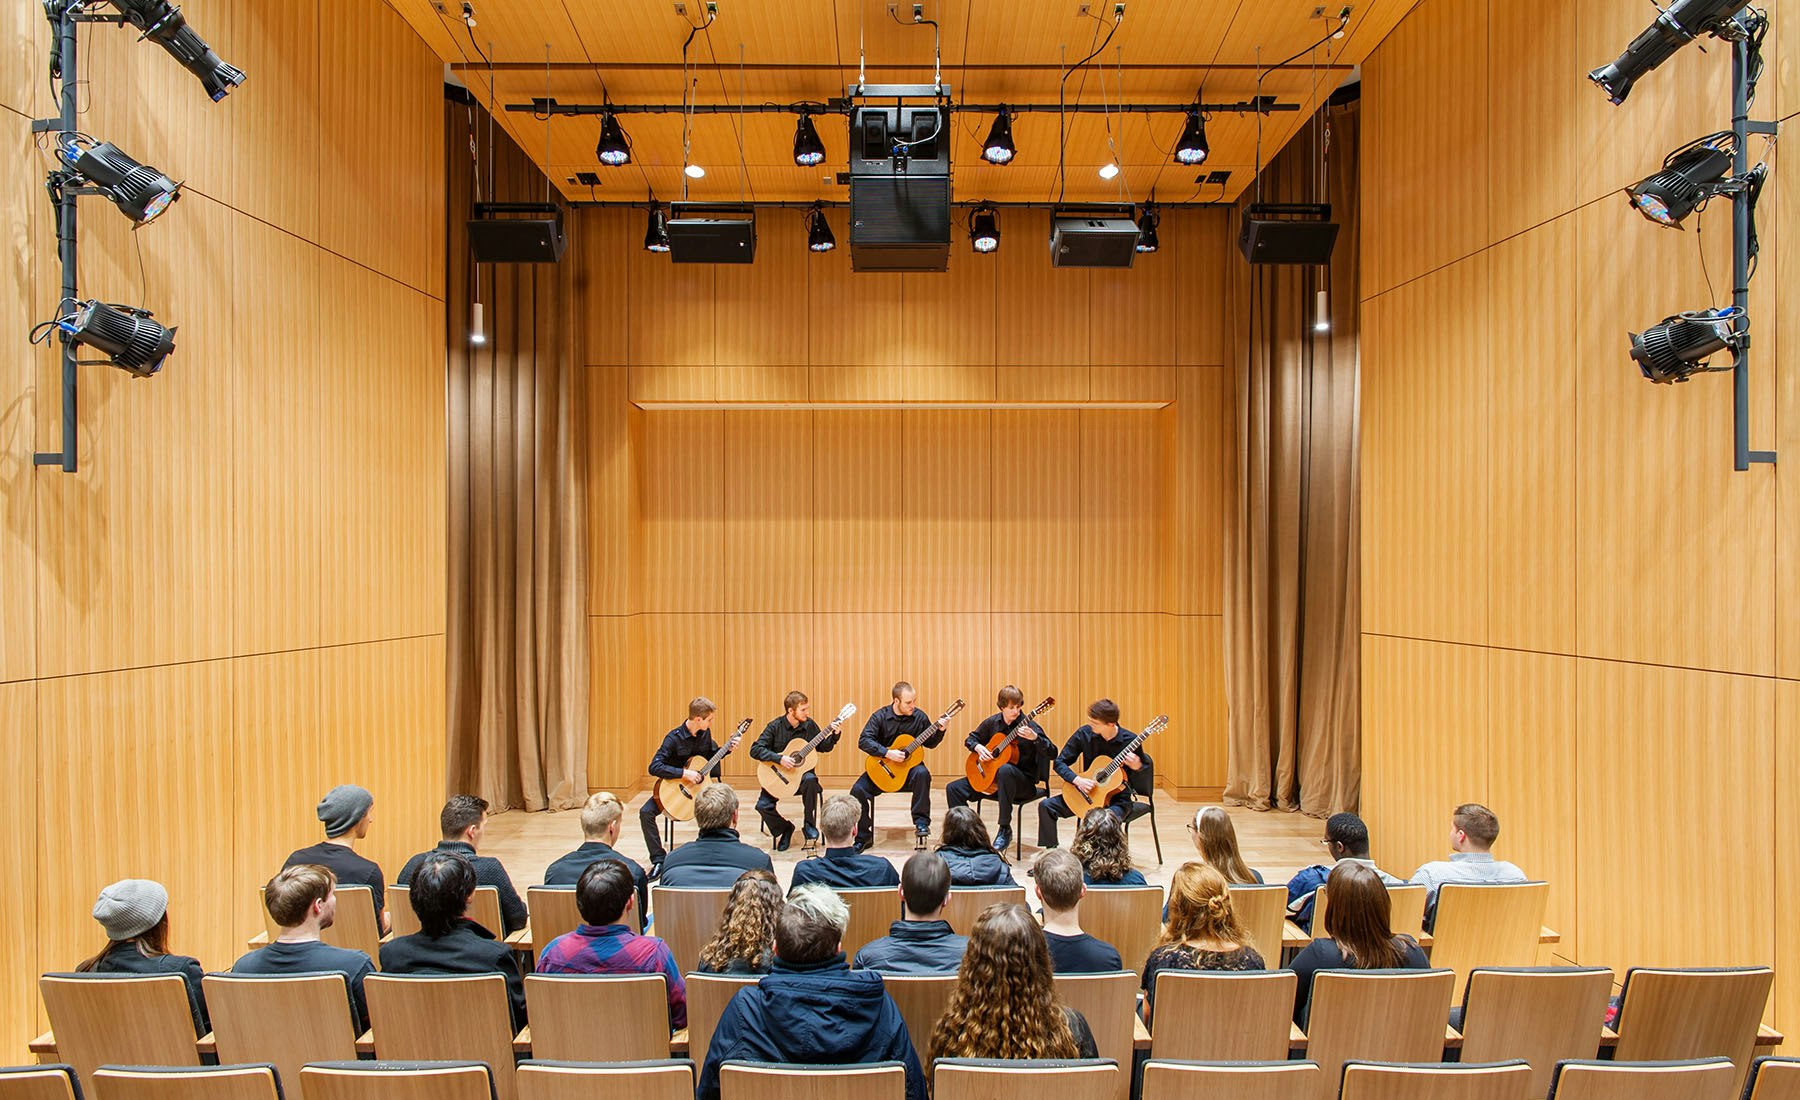 Students and instructors from a wide range of undergraduate and graduate degree programs meet and collaborate in a range of learning spaces, including: individual practice modules, small group practice rooms, teaching studios, commons rooms, traditional classrooms, and choral, percussion, and band practice rooms – each painstakingly designed to produce the perfect physical space for musical performance.